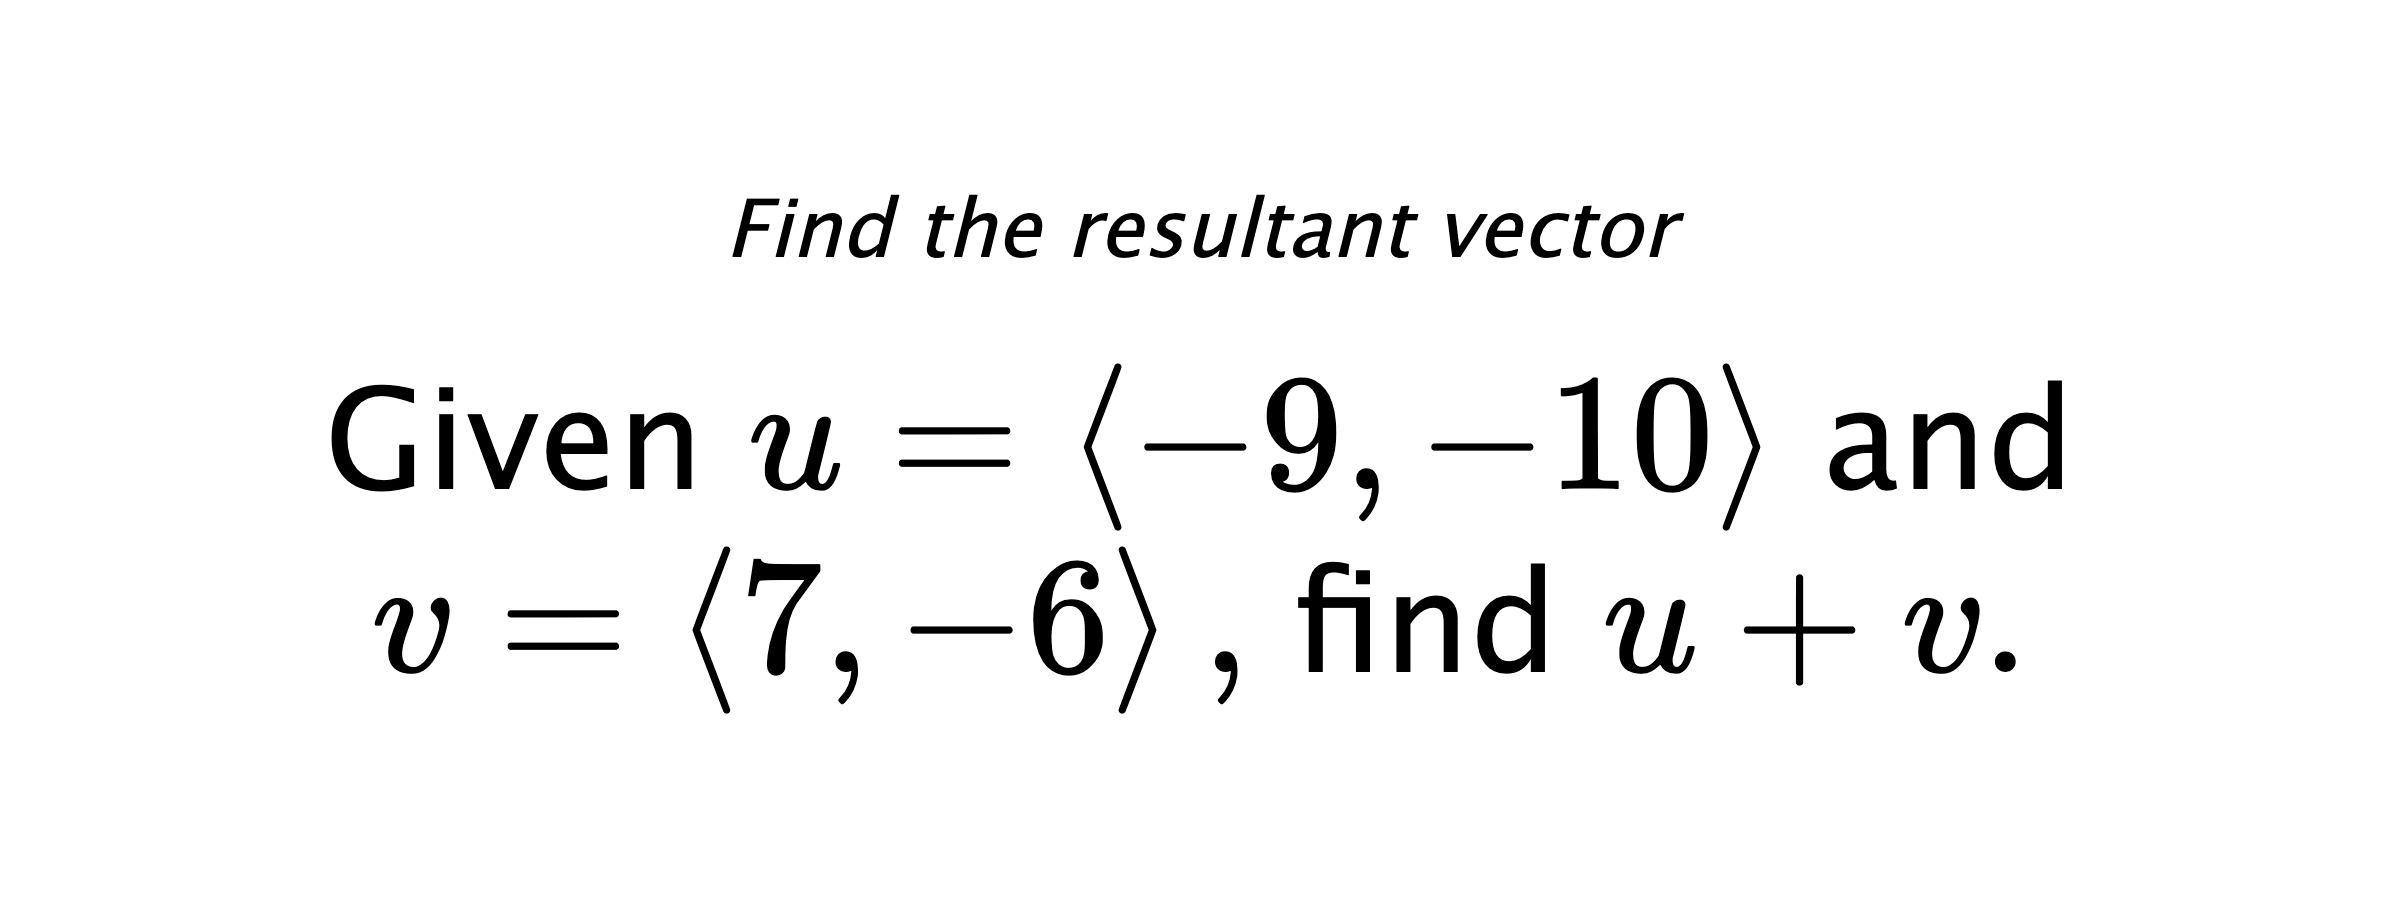 Find the resultant vector Given $ u = \left< -9,-10 \right> $ and $ v = \left< 7,-6 \right> ,$ find $ u+v .$